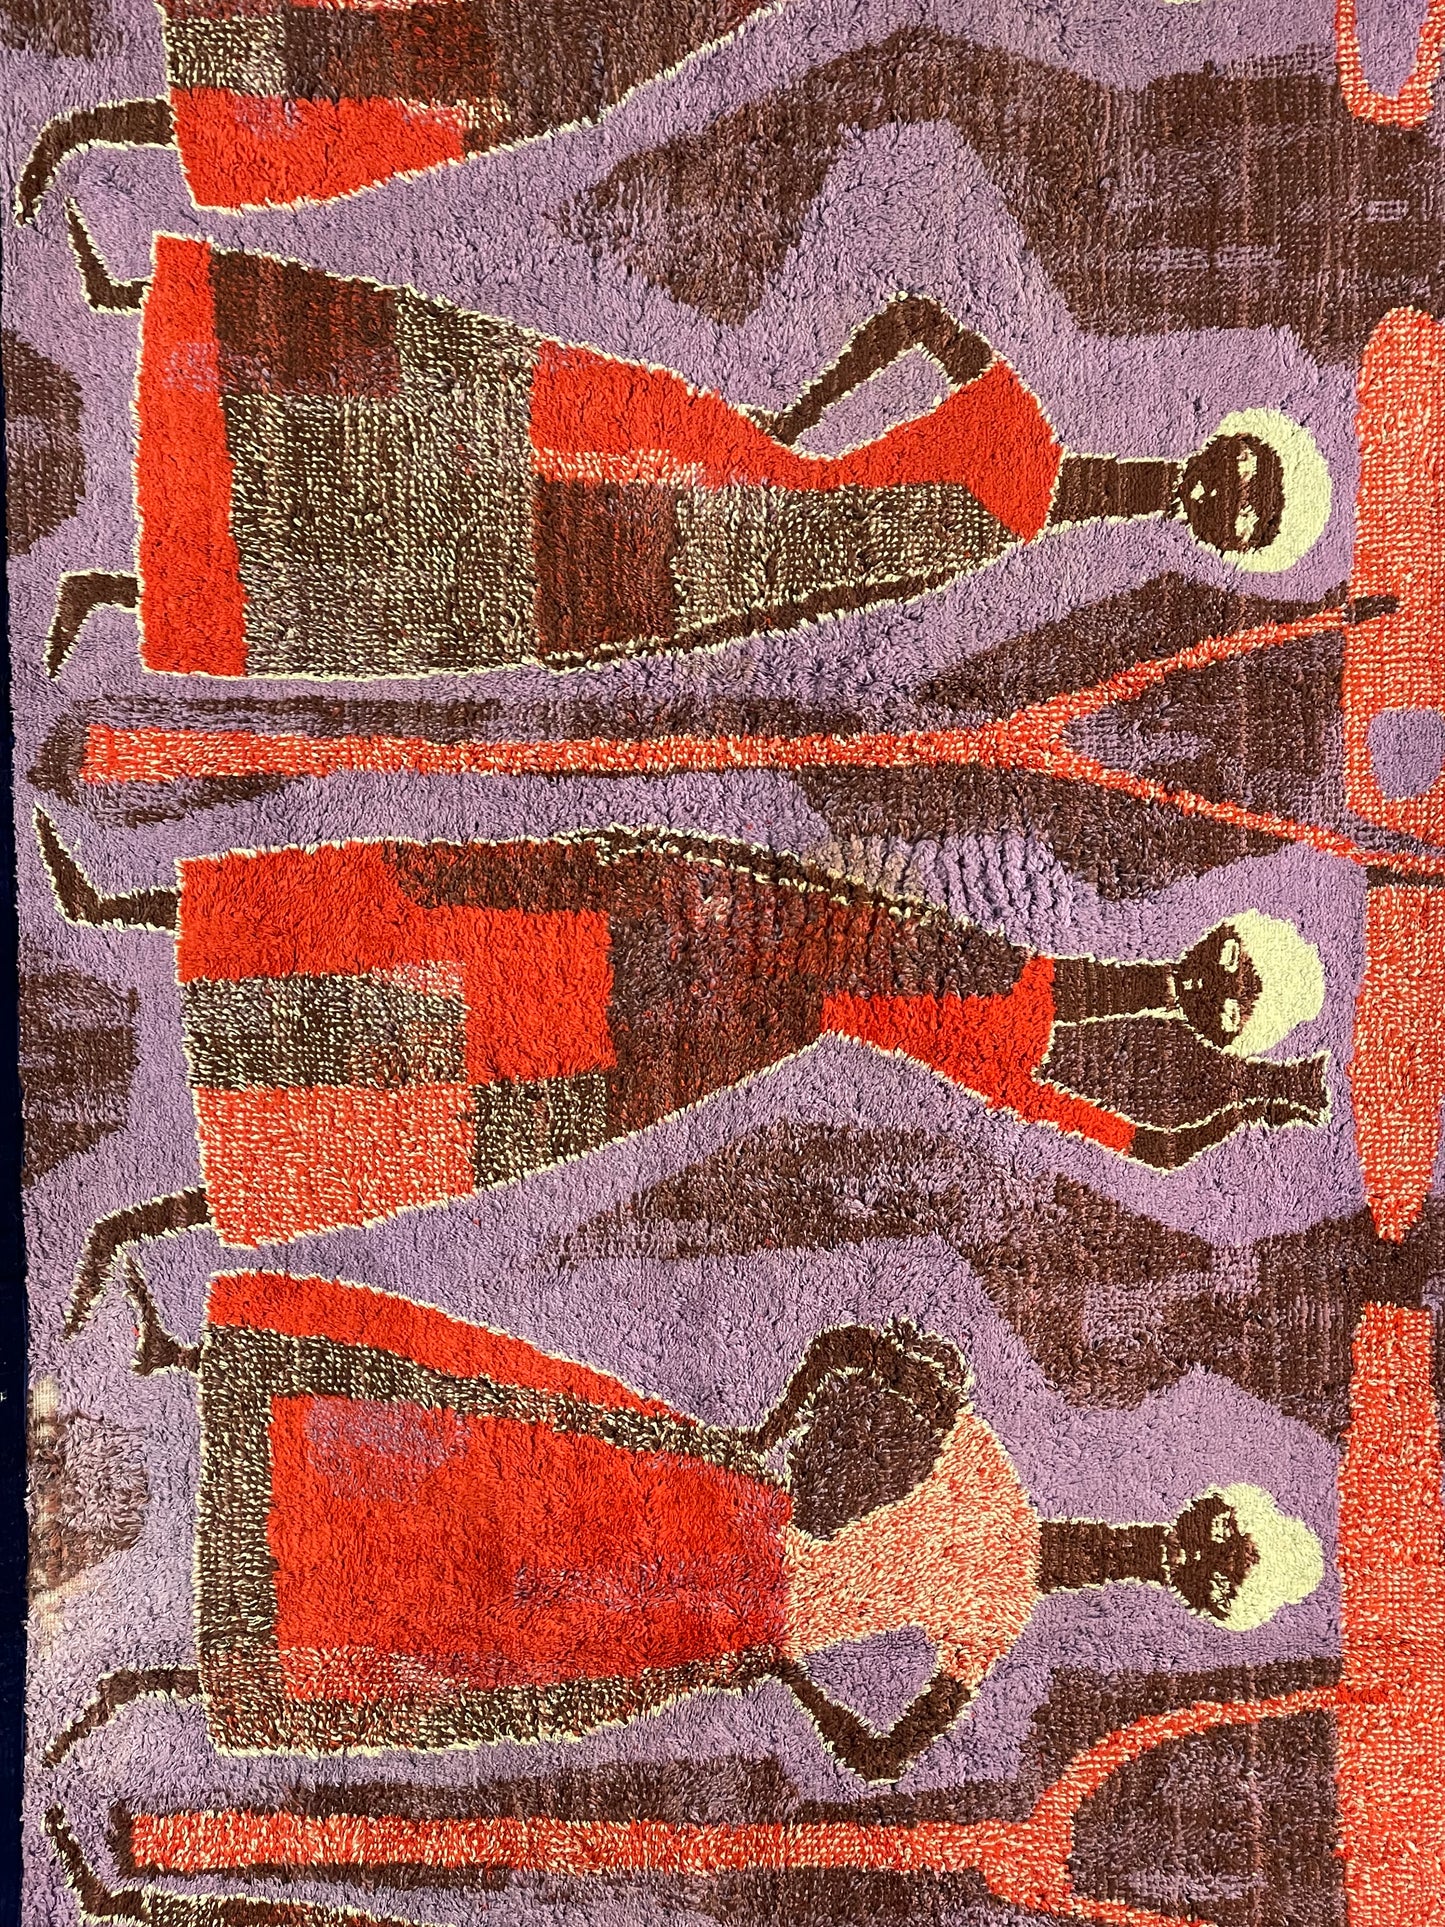 "Women with baskets and jugs" wonderful retro wall carpet in purple/red/brown shades